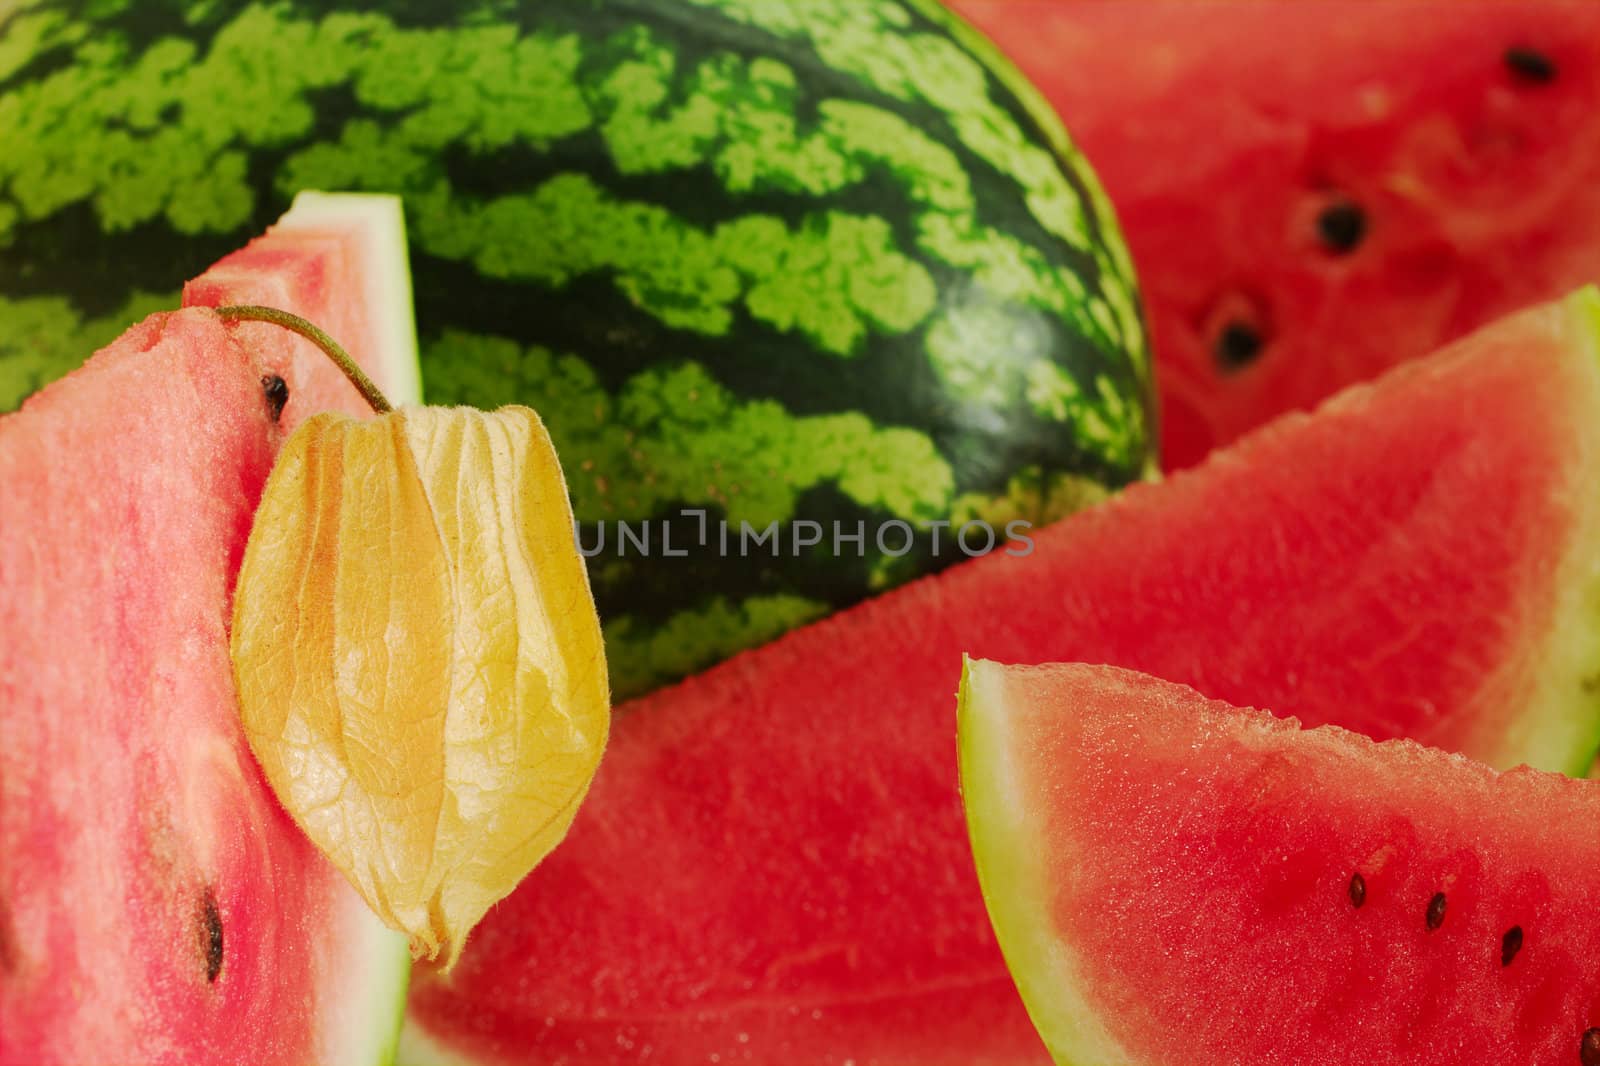 Physalis fruit (Chinese Lantern) in between water melon slices (Selective Focus)